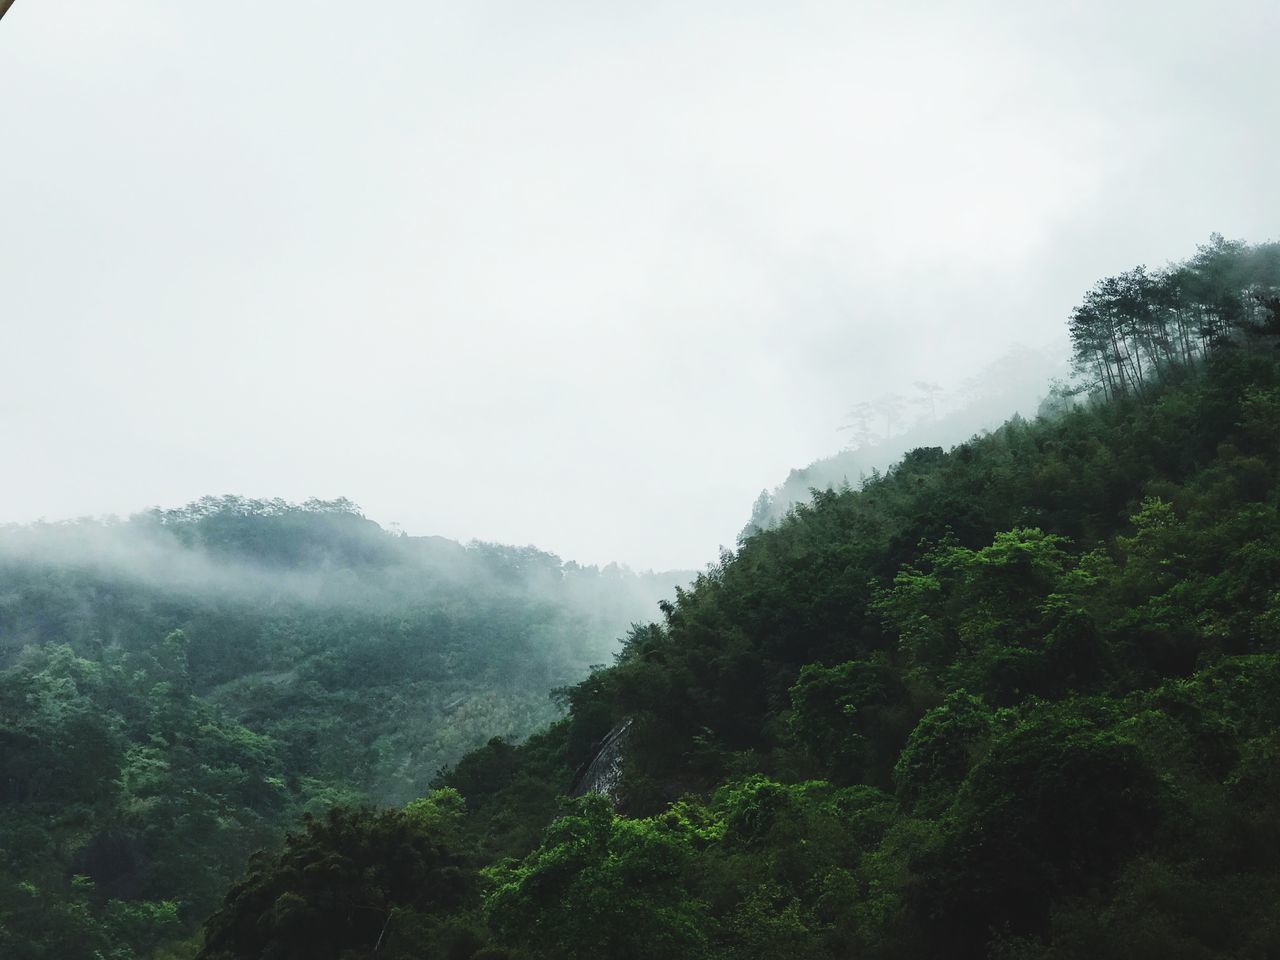 tree, fog, plant, mountain, scenics - nature, tranquility, beauty in nature, sky, tranquil scene, nature, non-urban scene, environment, no people, forest, green color, day, landscape, land, growth, outdoors, hazy, rainforest